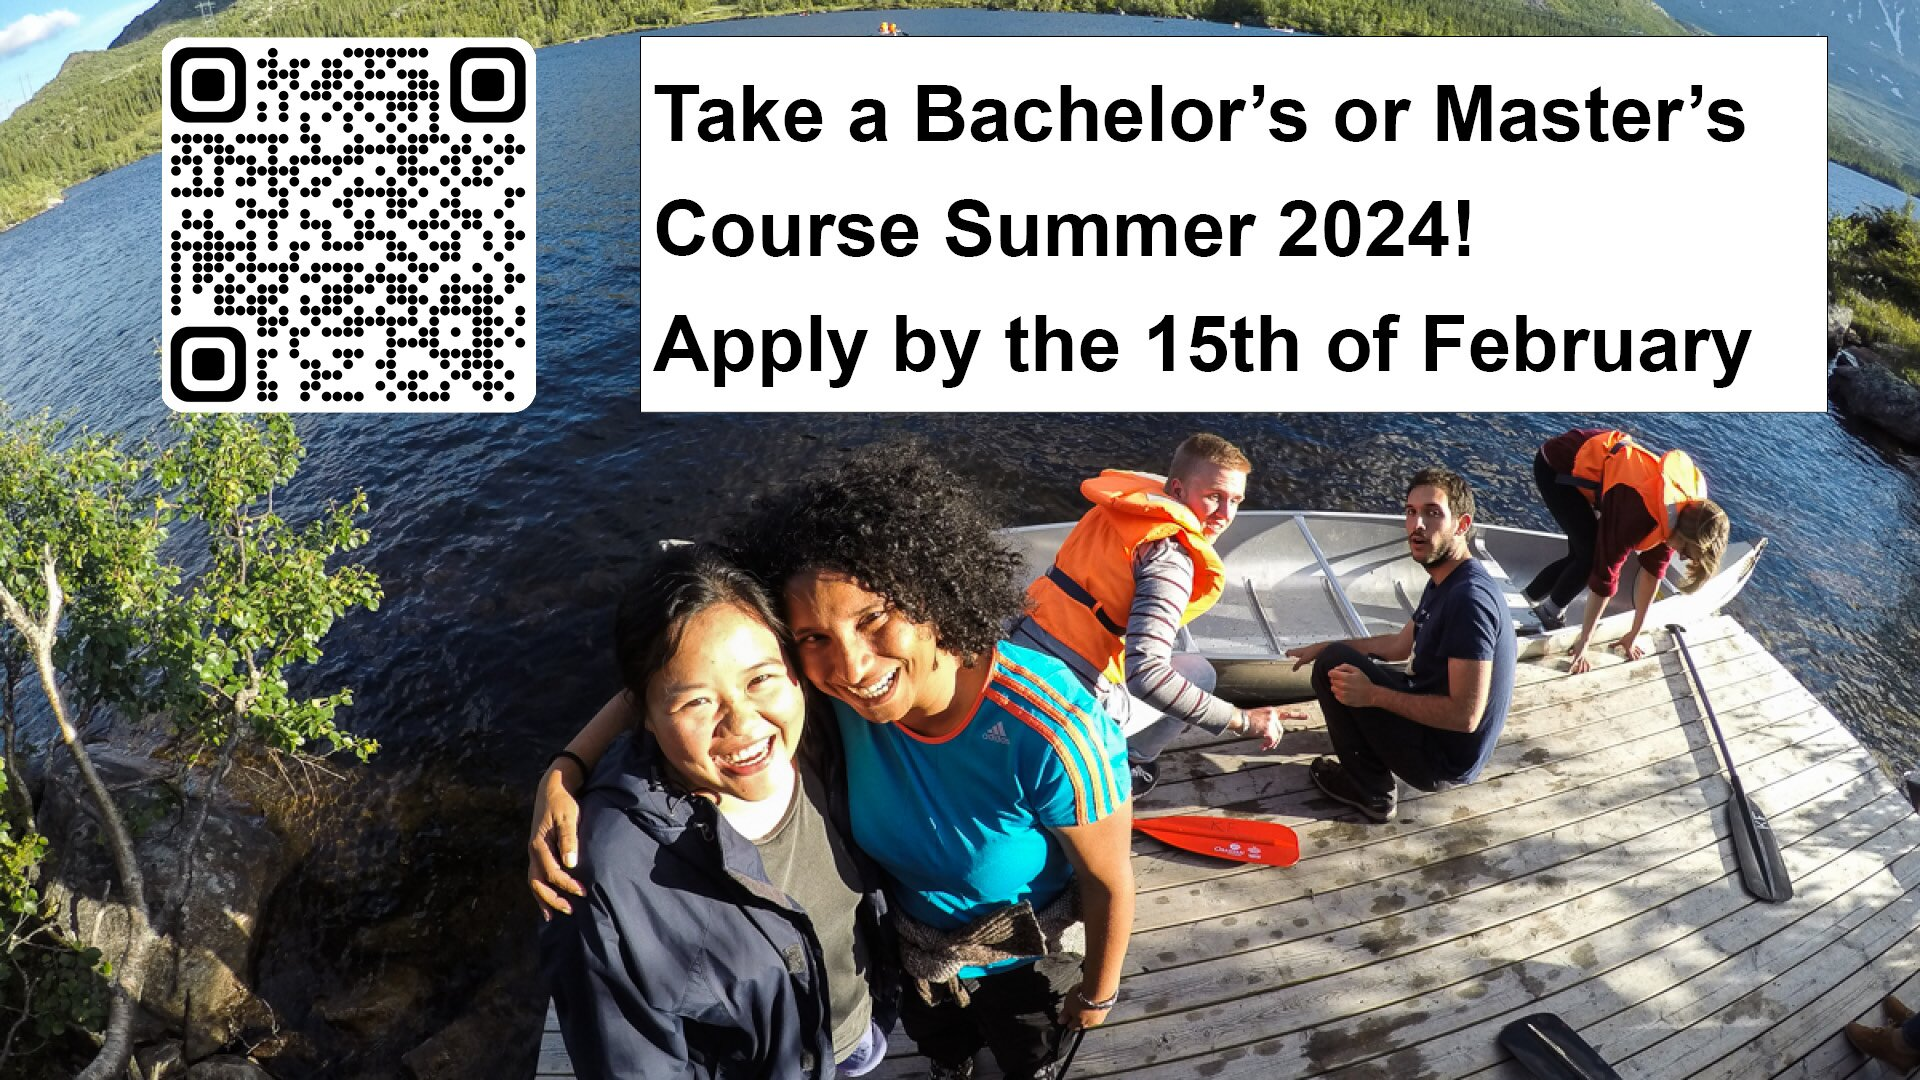 Take a bachelor's or Master's Course Summer 2024! Apply by the 15th of February